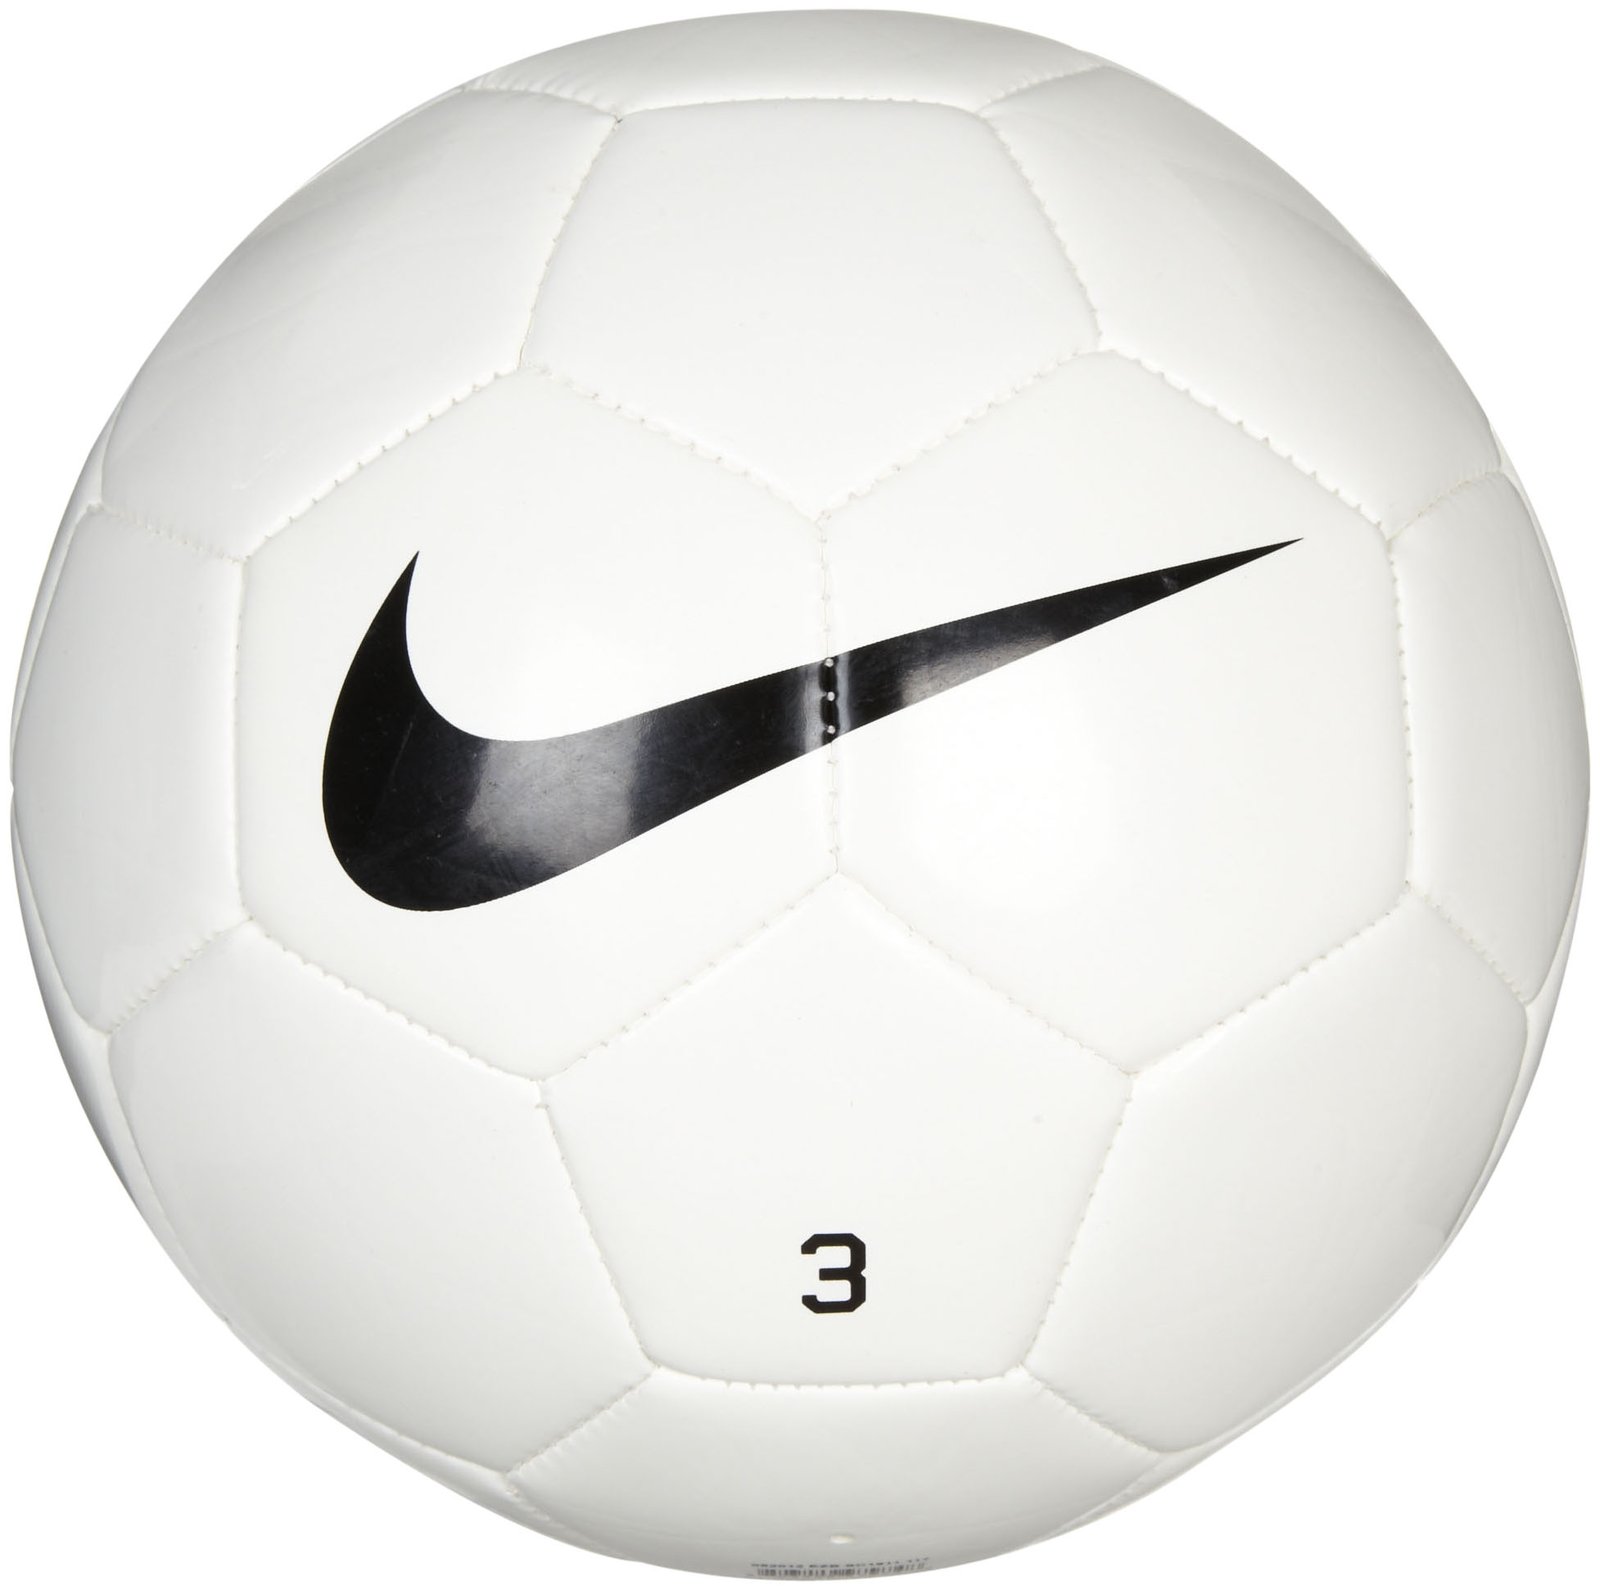 Black And White Soccer Ball   Free Cliparts That You Can Download To